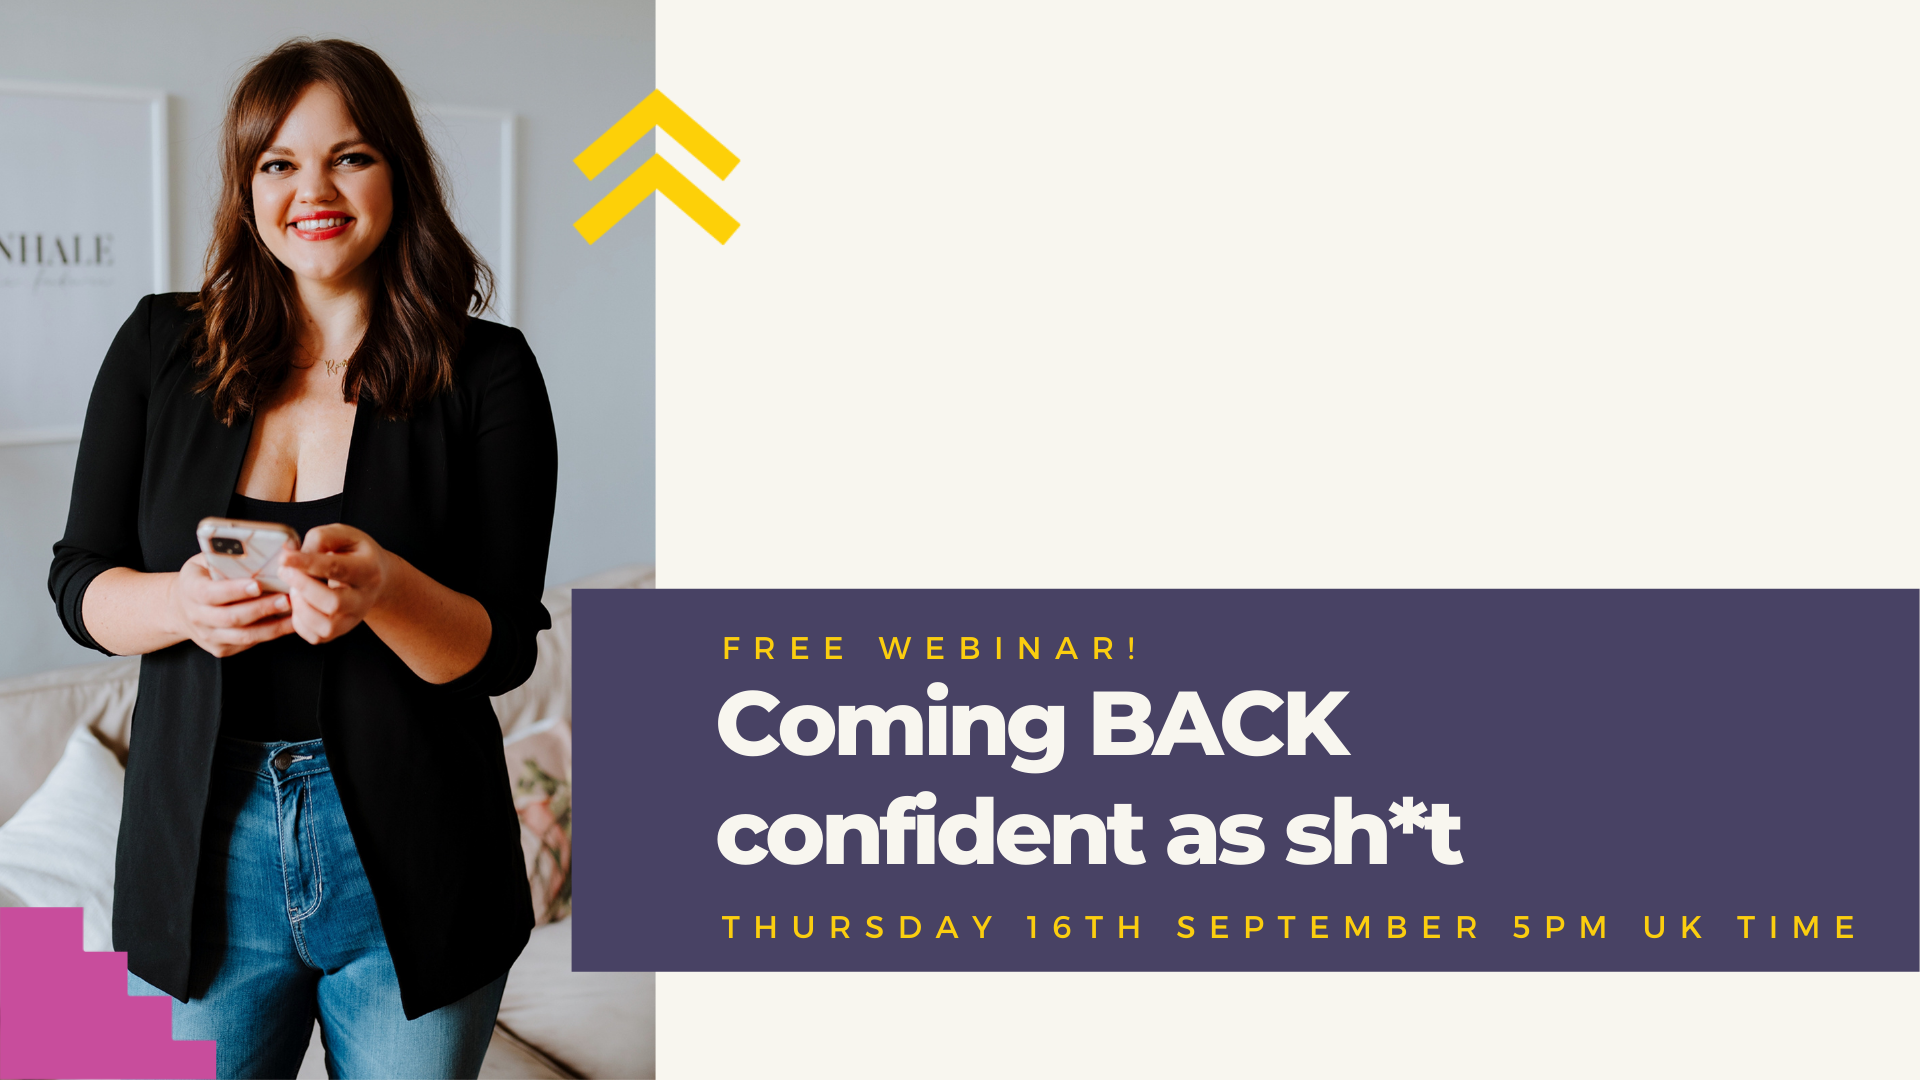 Free webinar: Coming BACK confident as shit